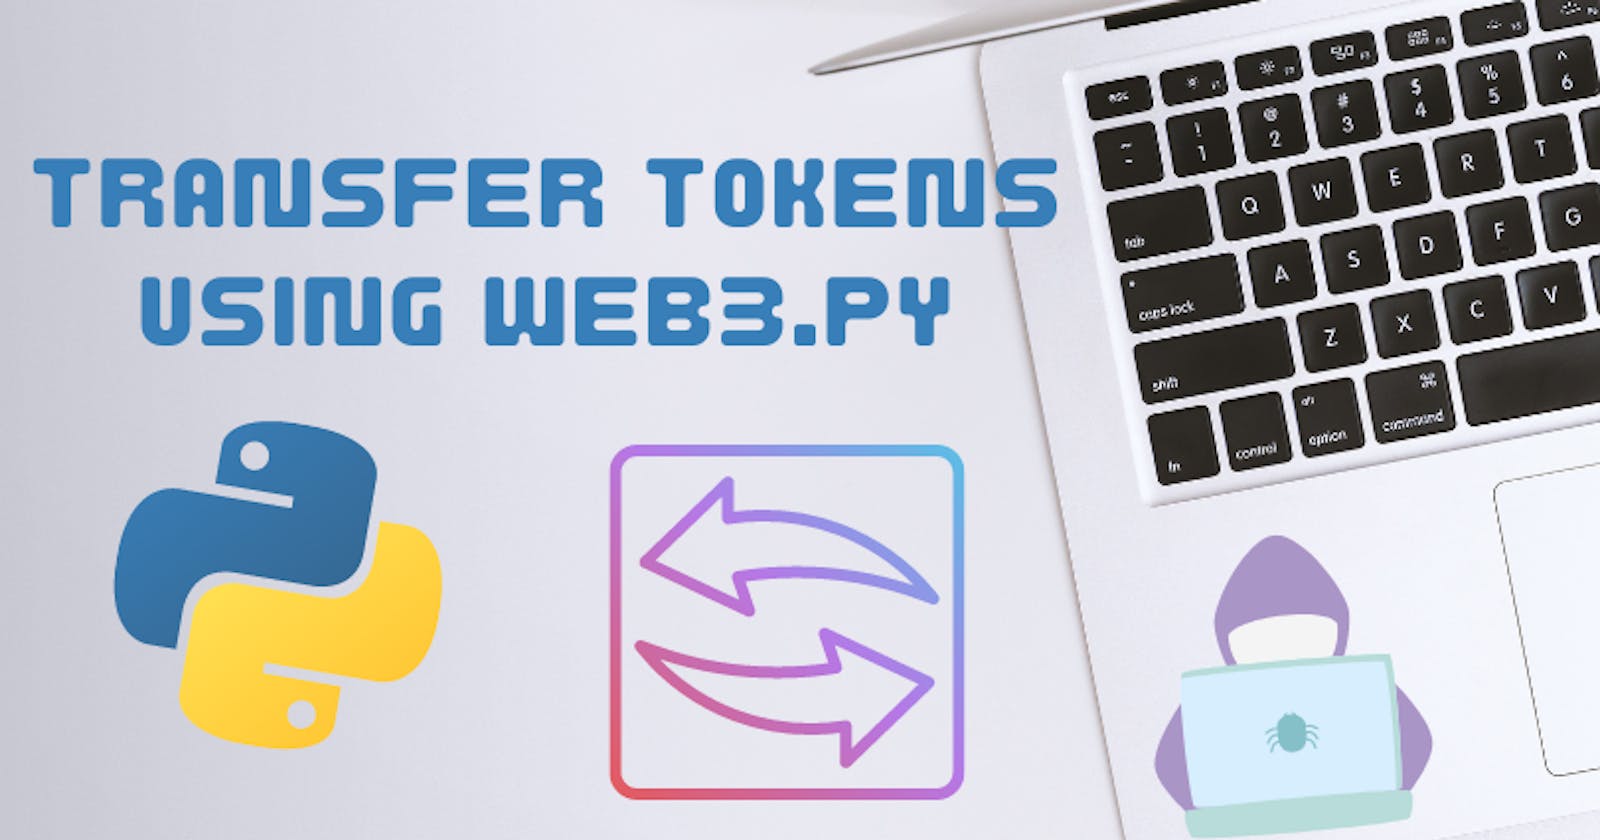 Transfer tokens between accounts using web3.py